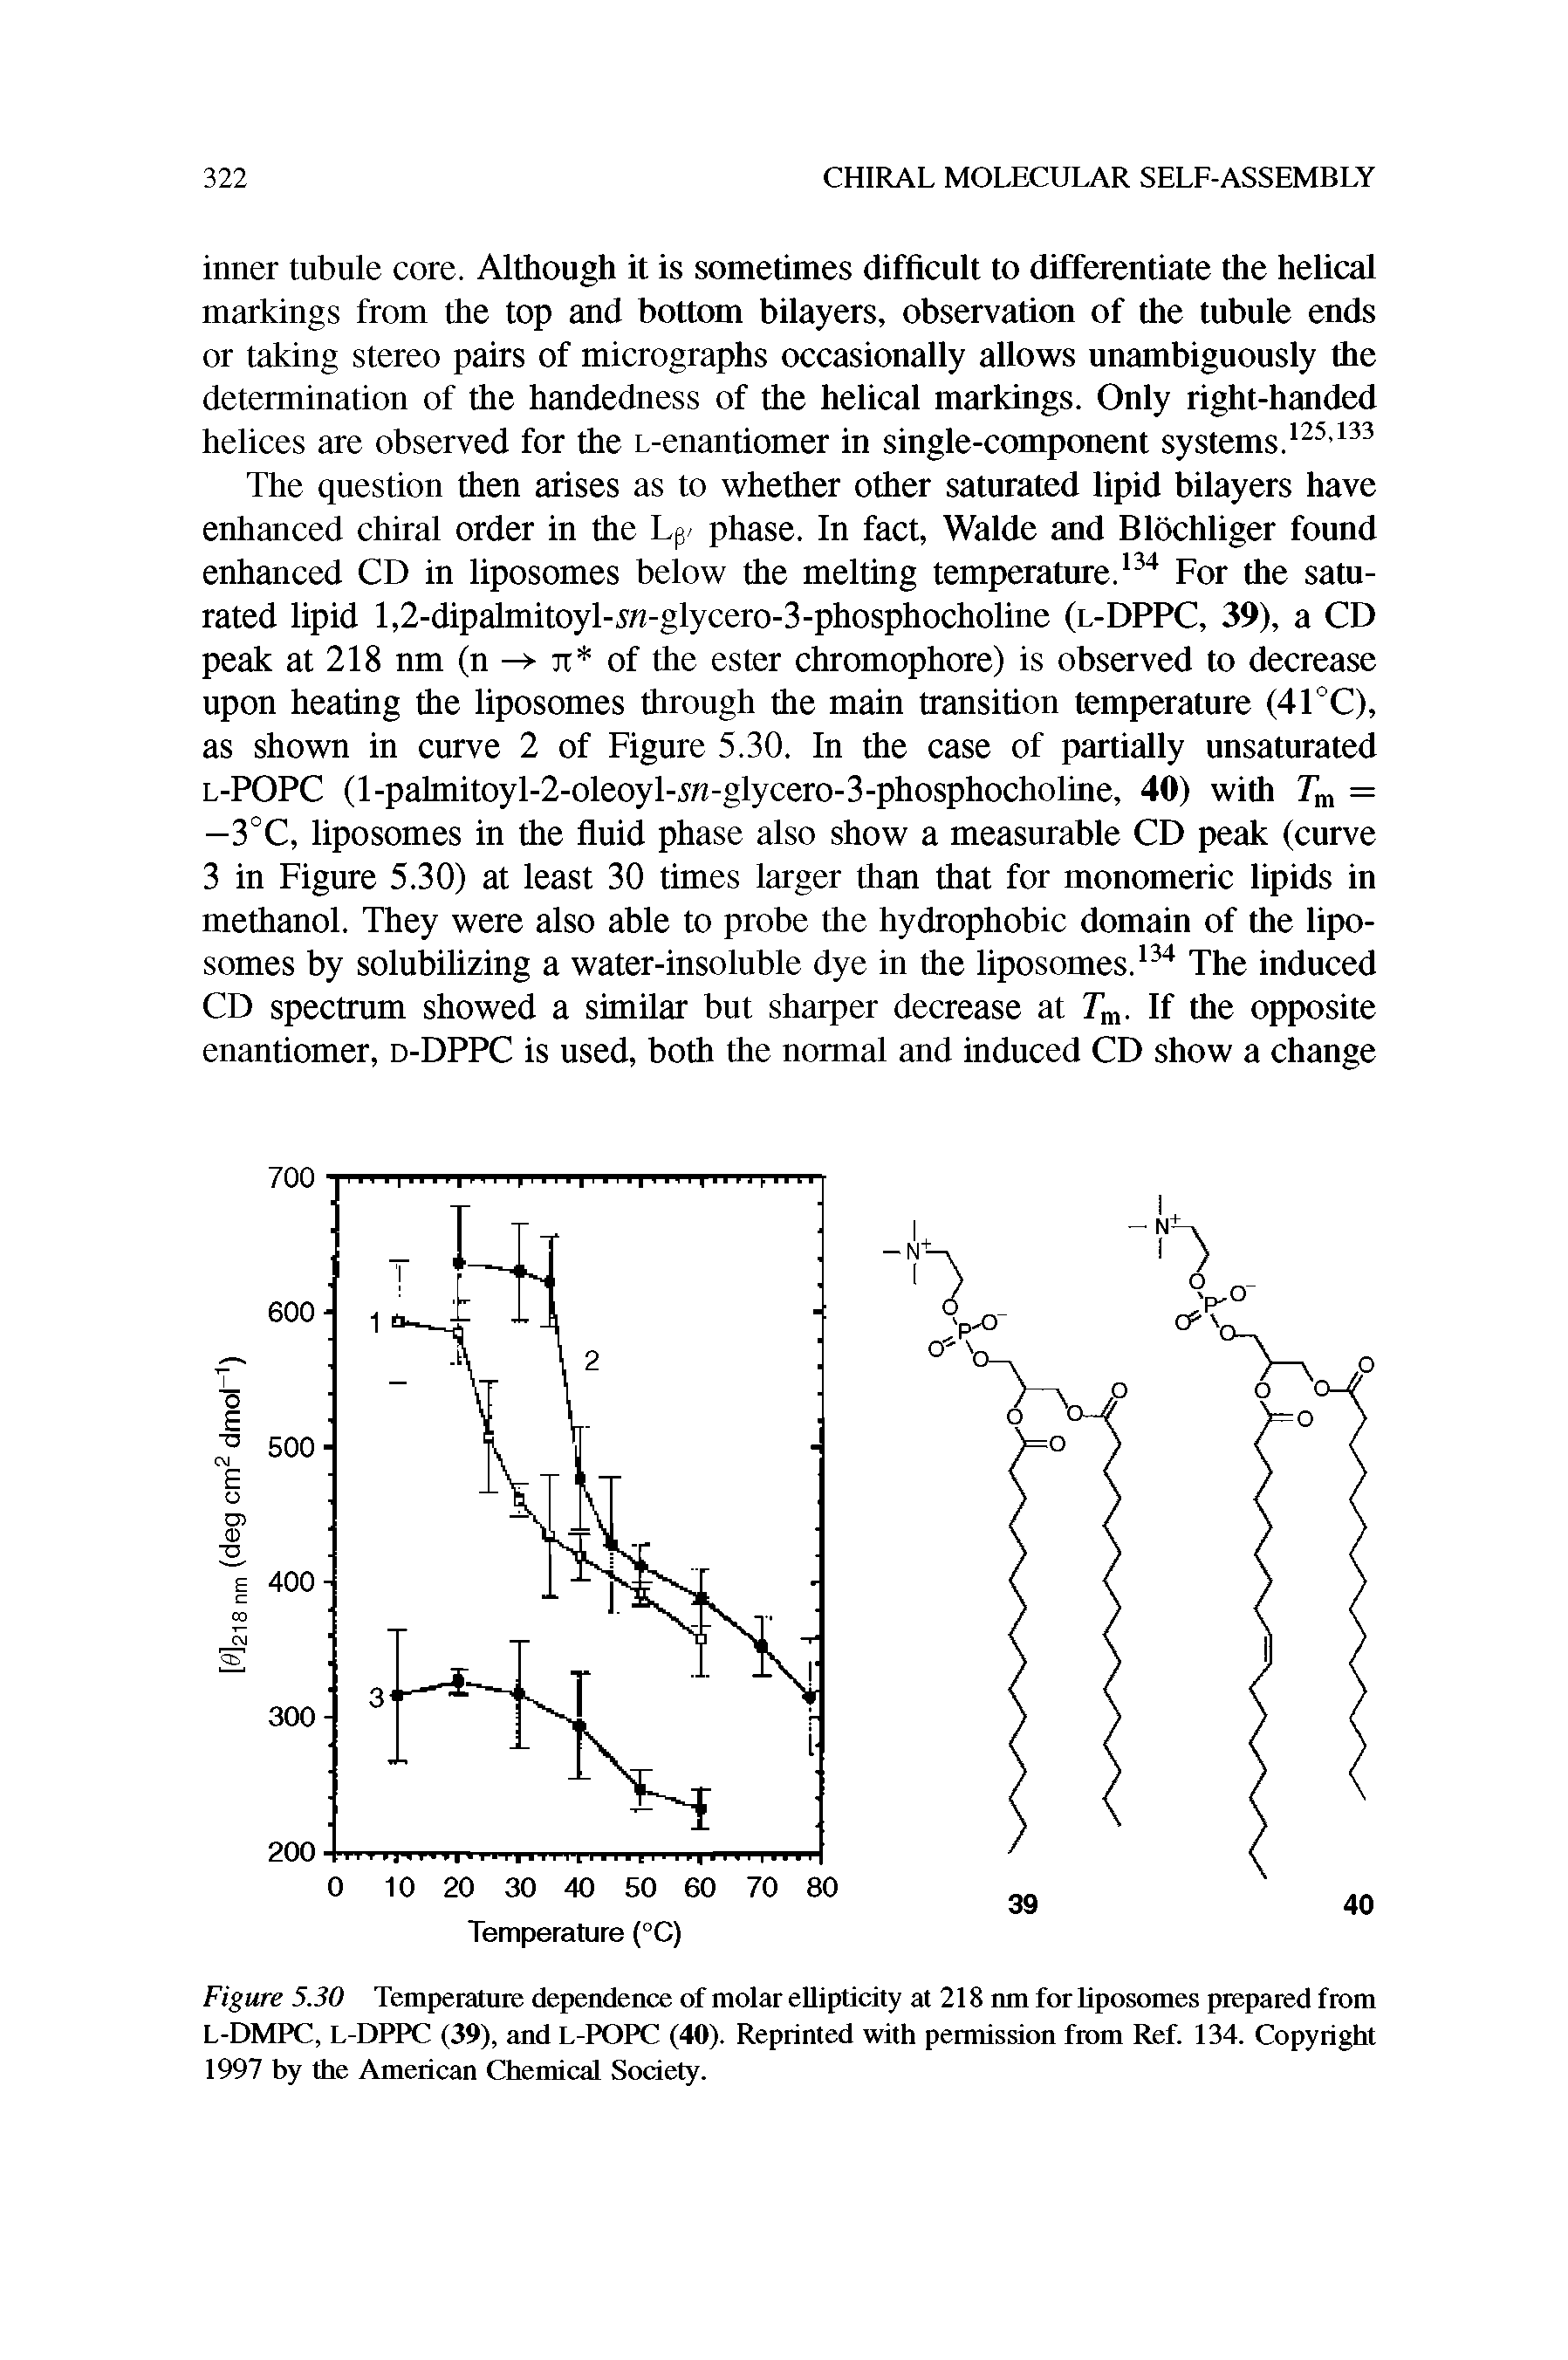 Figure 5.30 Temperature dependence of molar ellipticity at 218 nm for liposomes prepared from L-DMPC, L-DPPC (39), and L-POPC (40). Reprinted with permission from Ref. 134. Copyright 1997 by the American Chemical Society.